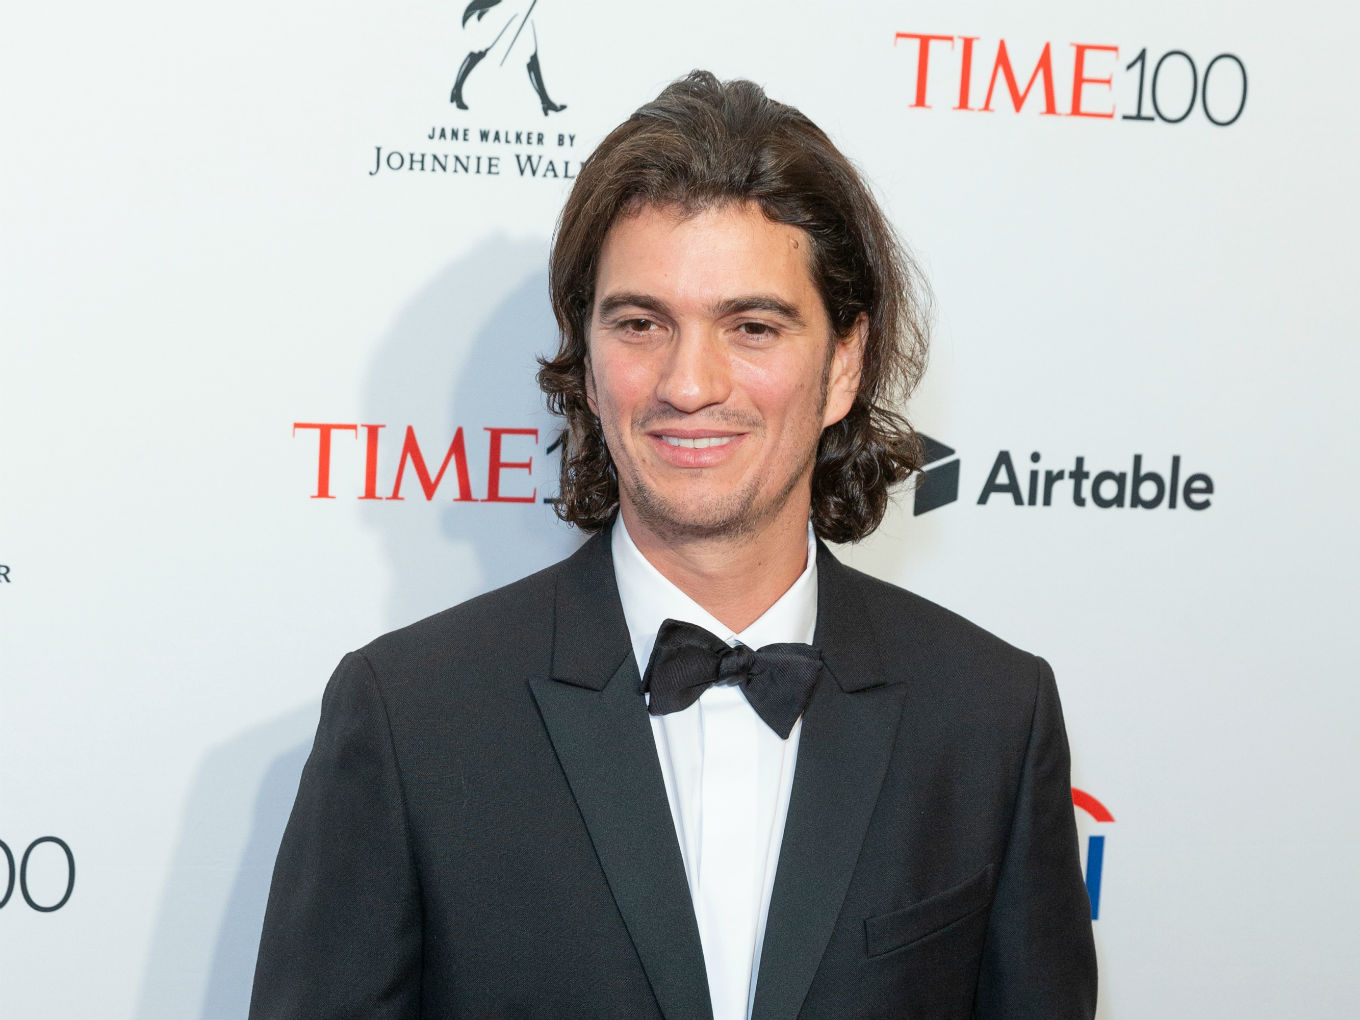 The Rise And Fall Of WeWork Will Now Be Shown In A Television Show